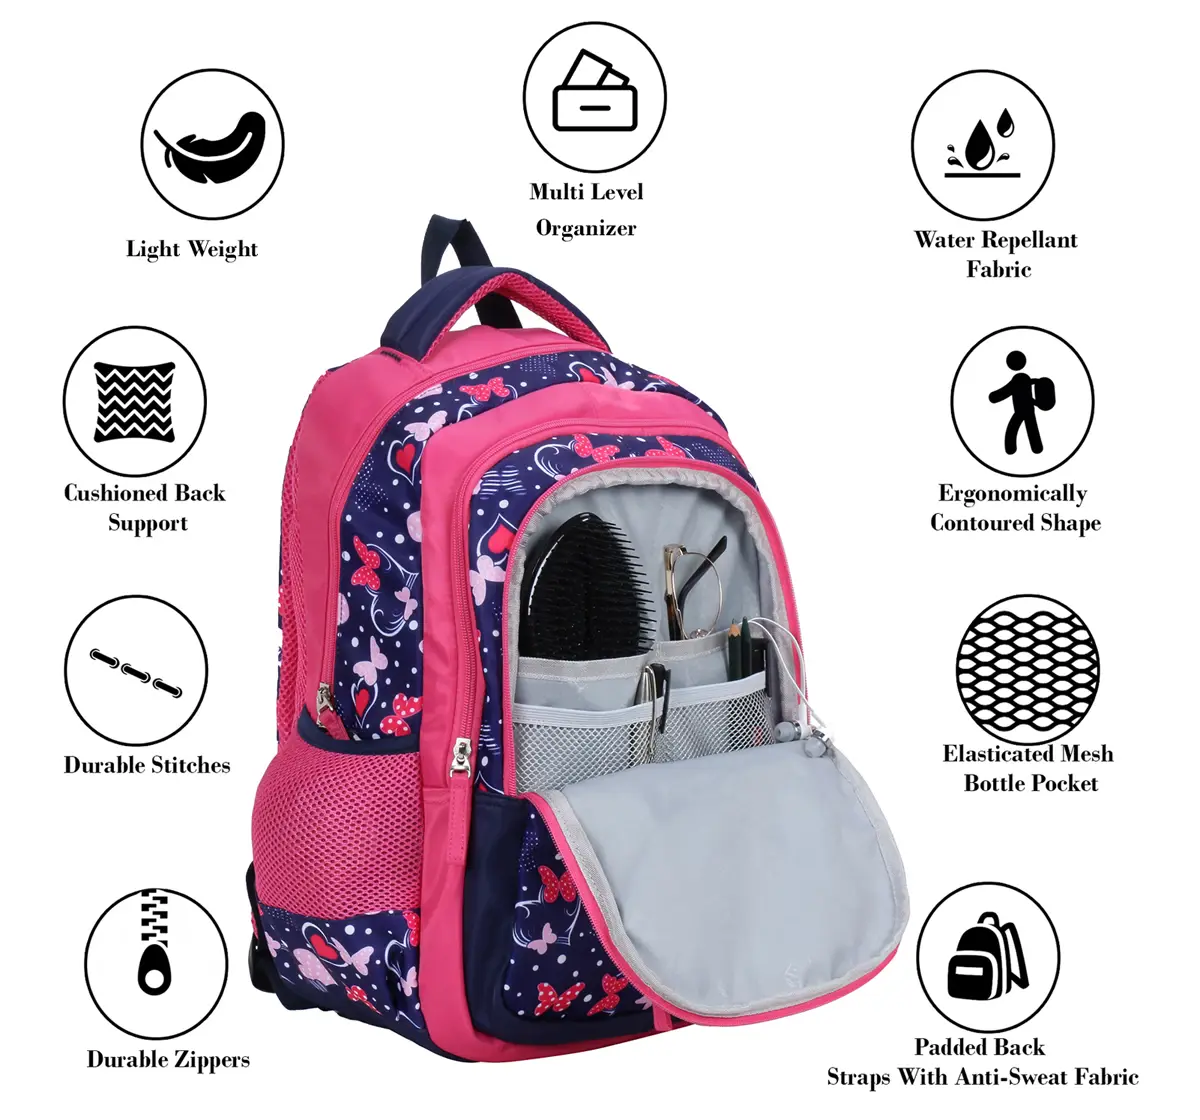 Simba Steffi Love Rising Sparkle Pink 15 Backpack Multicolor 3Y+